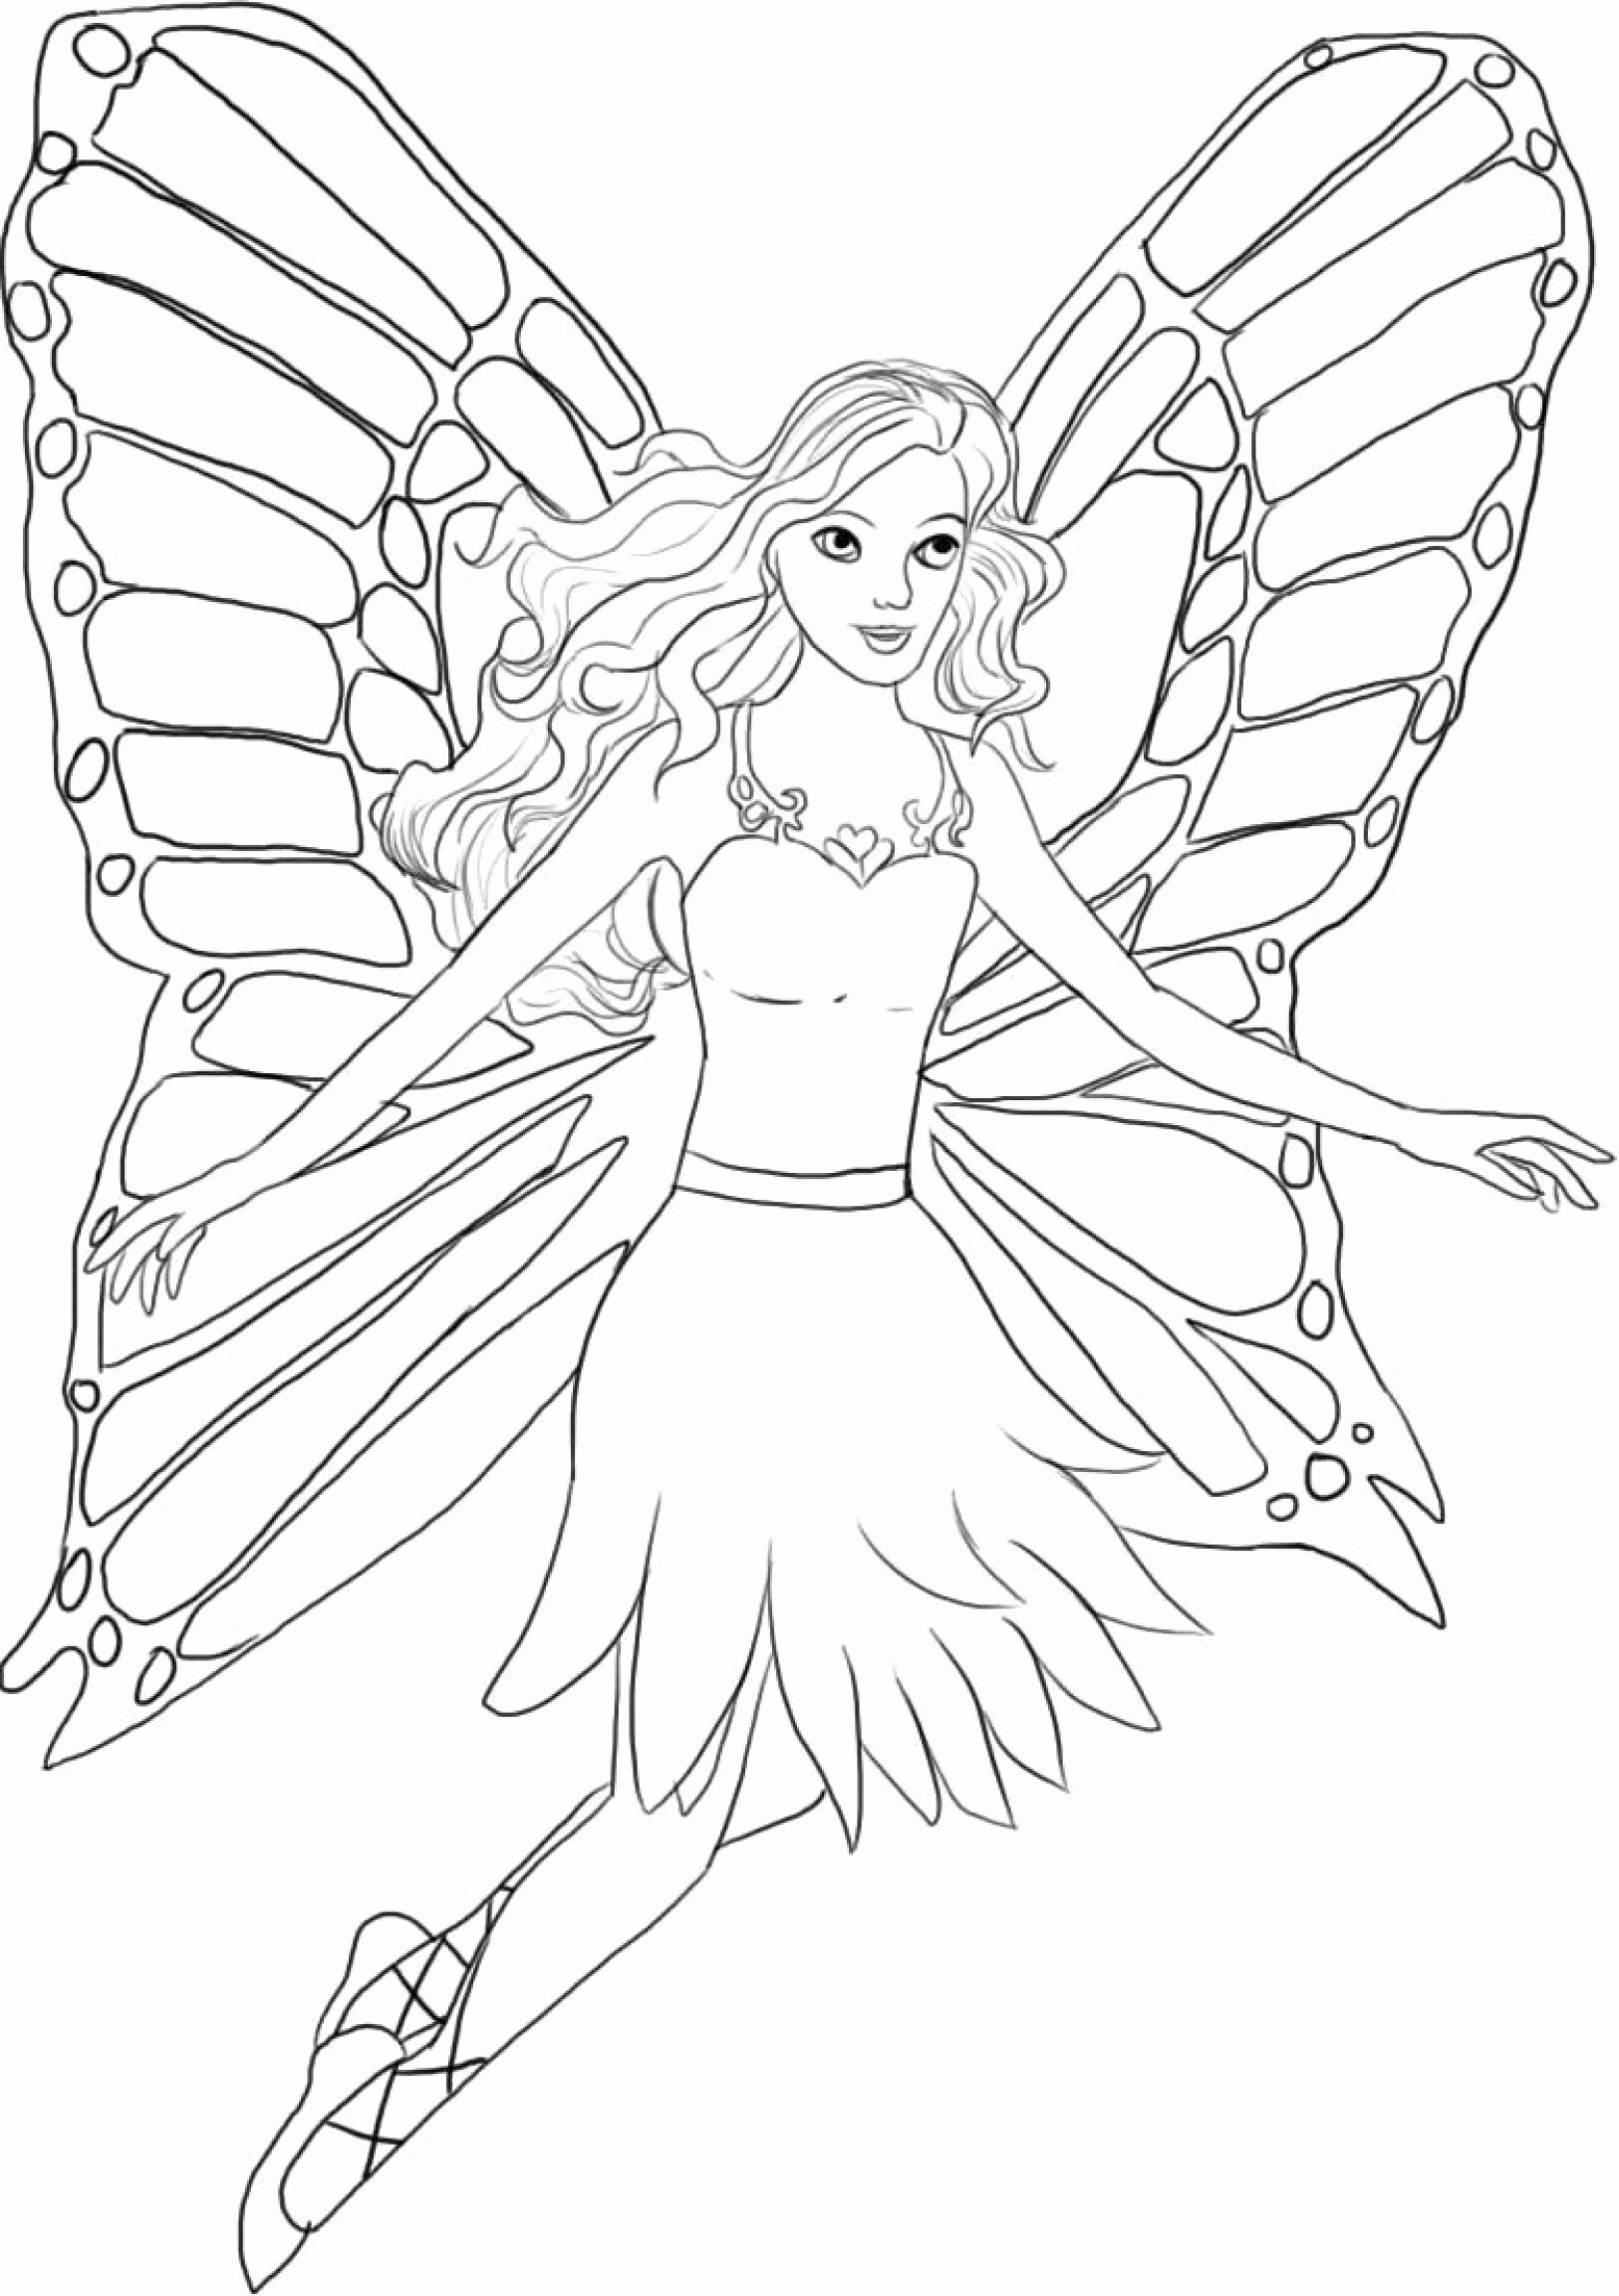 Fairy Coloring Pages New Fairy Princess Coloring Pages Fresh Awesome Fairy Coloring Page